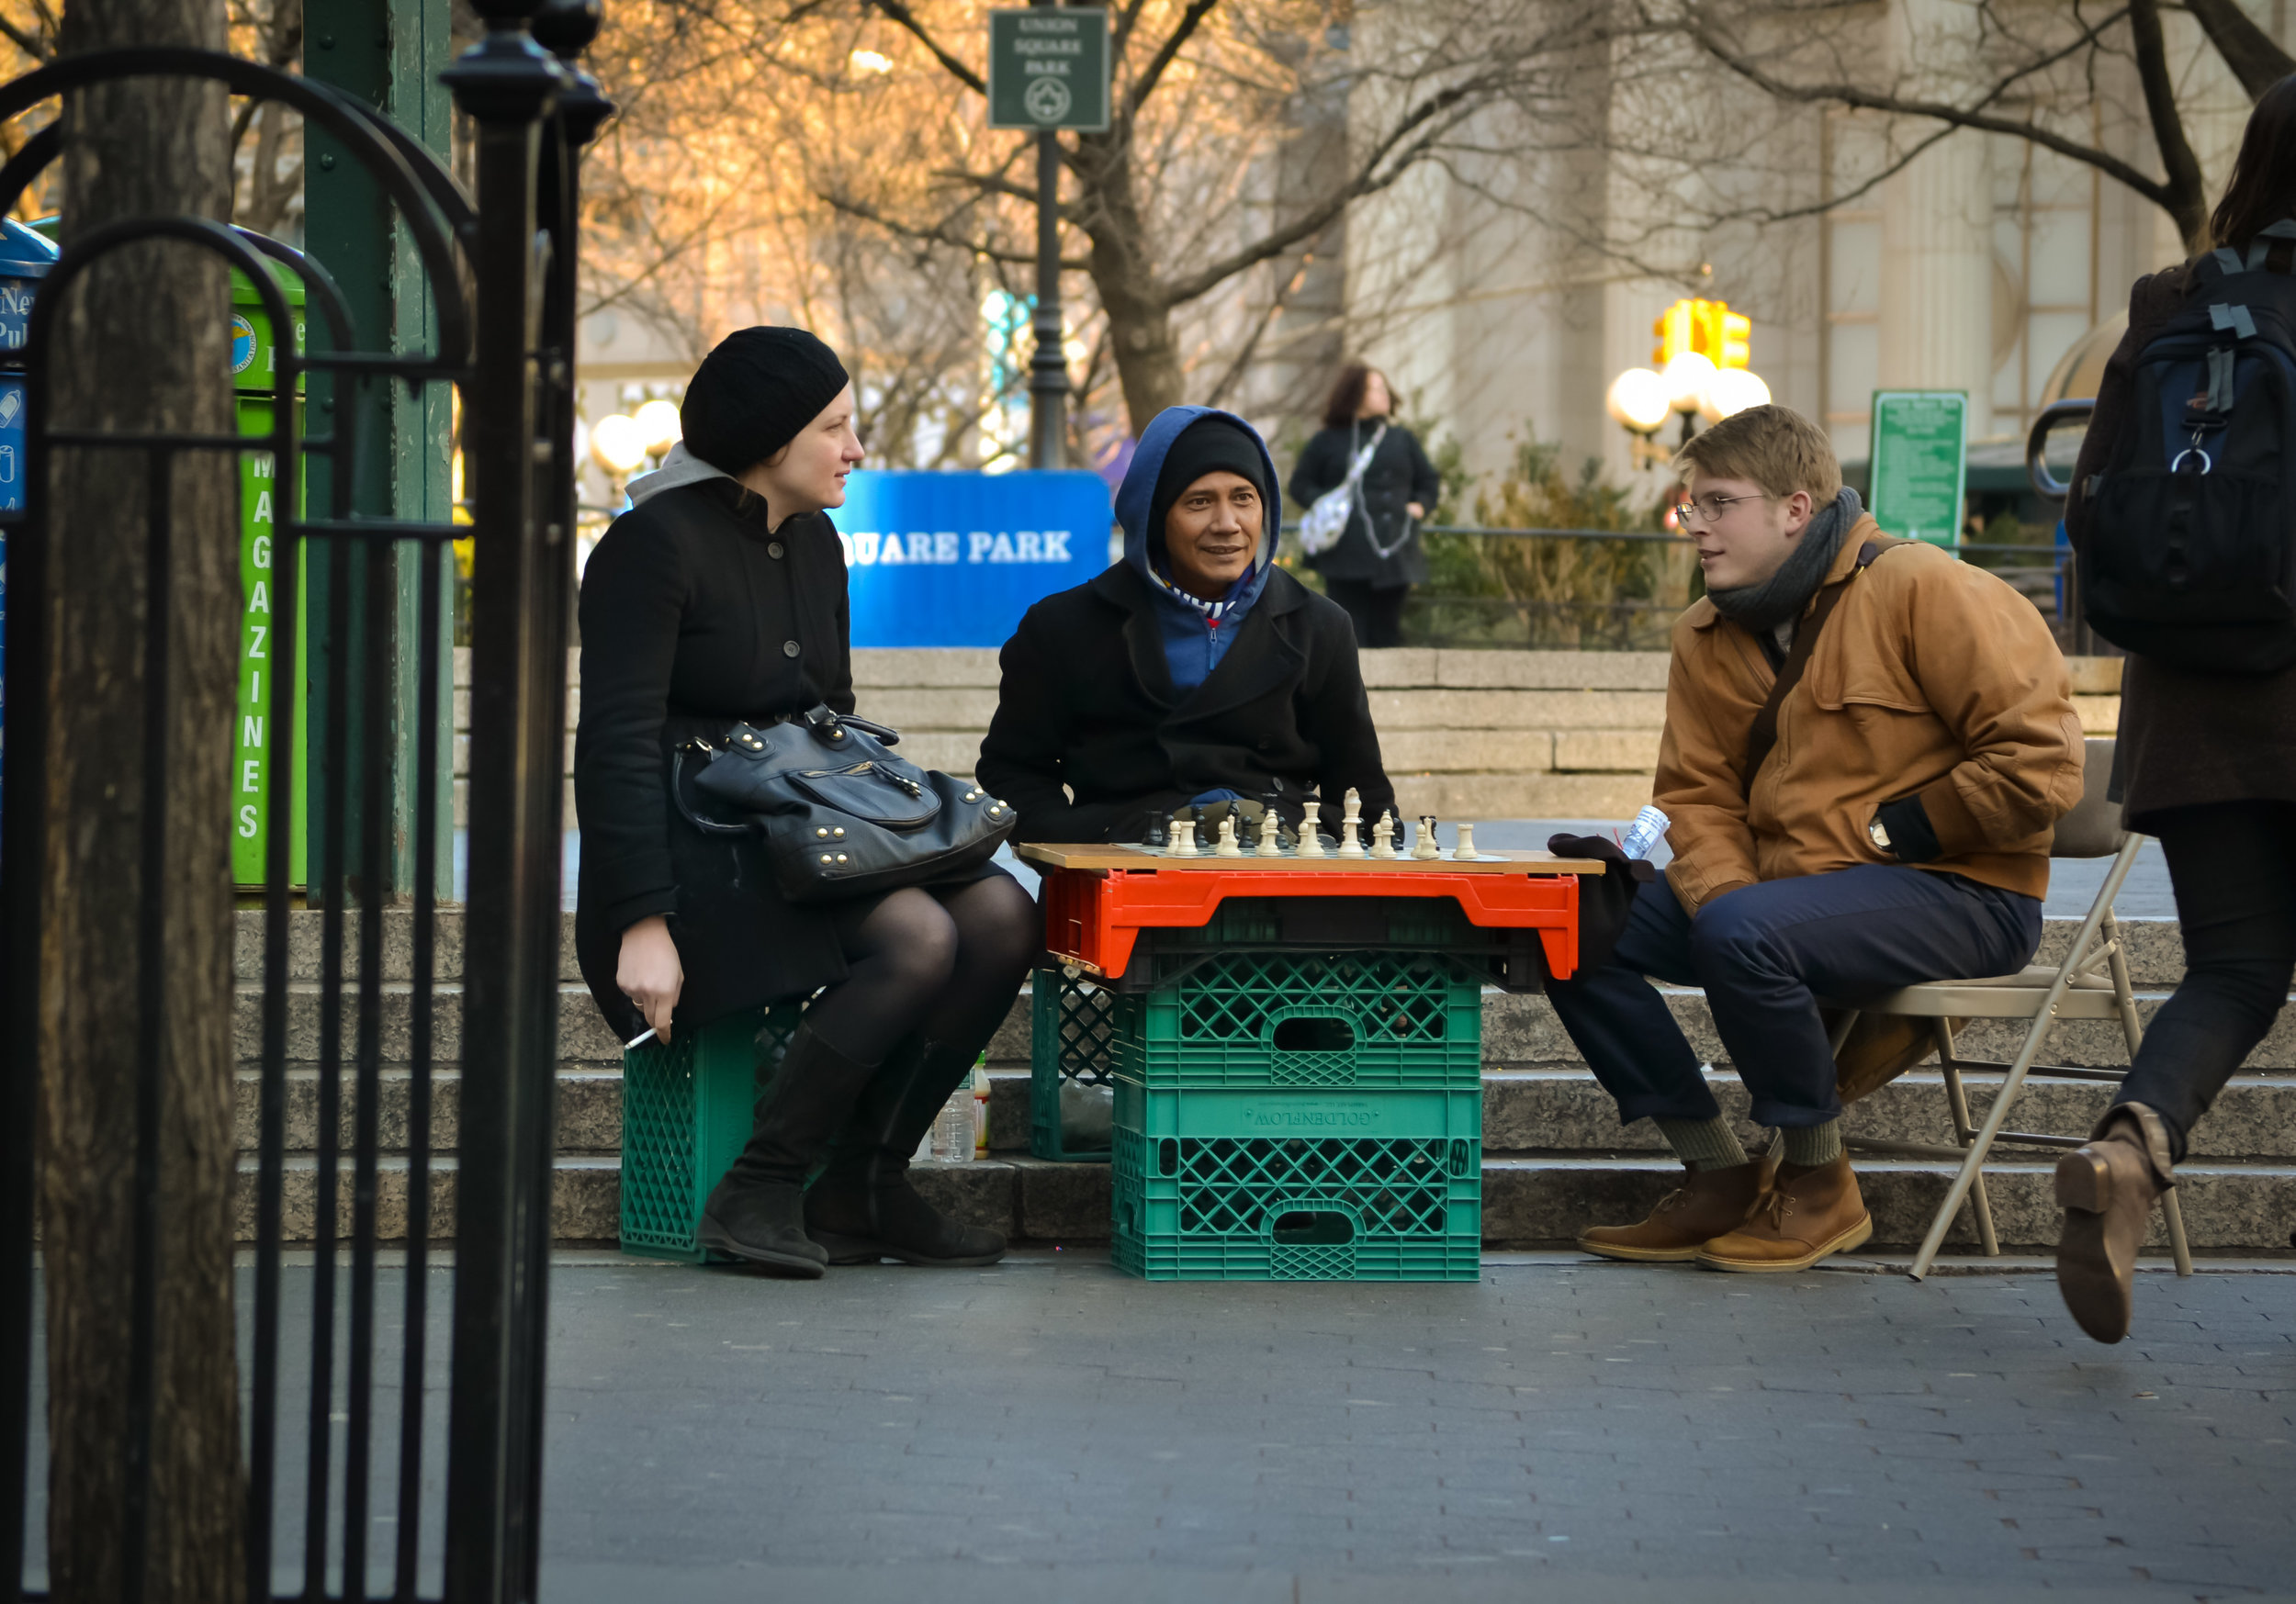 This chess hustler makes $400 a day